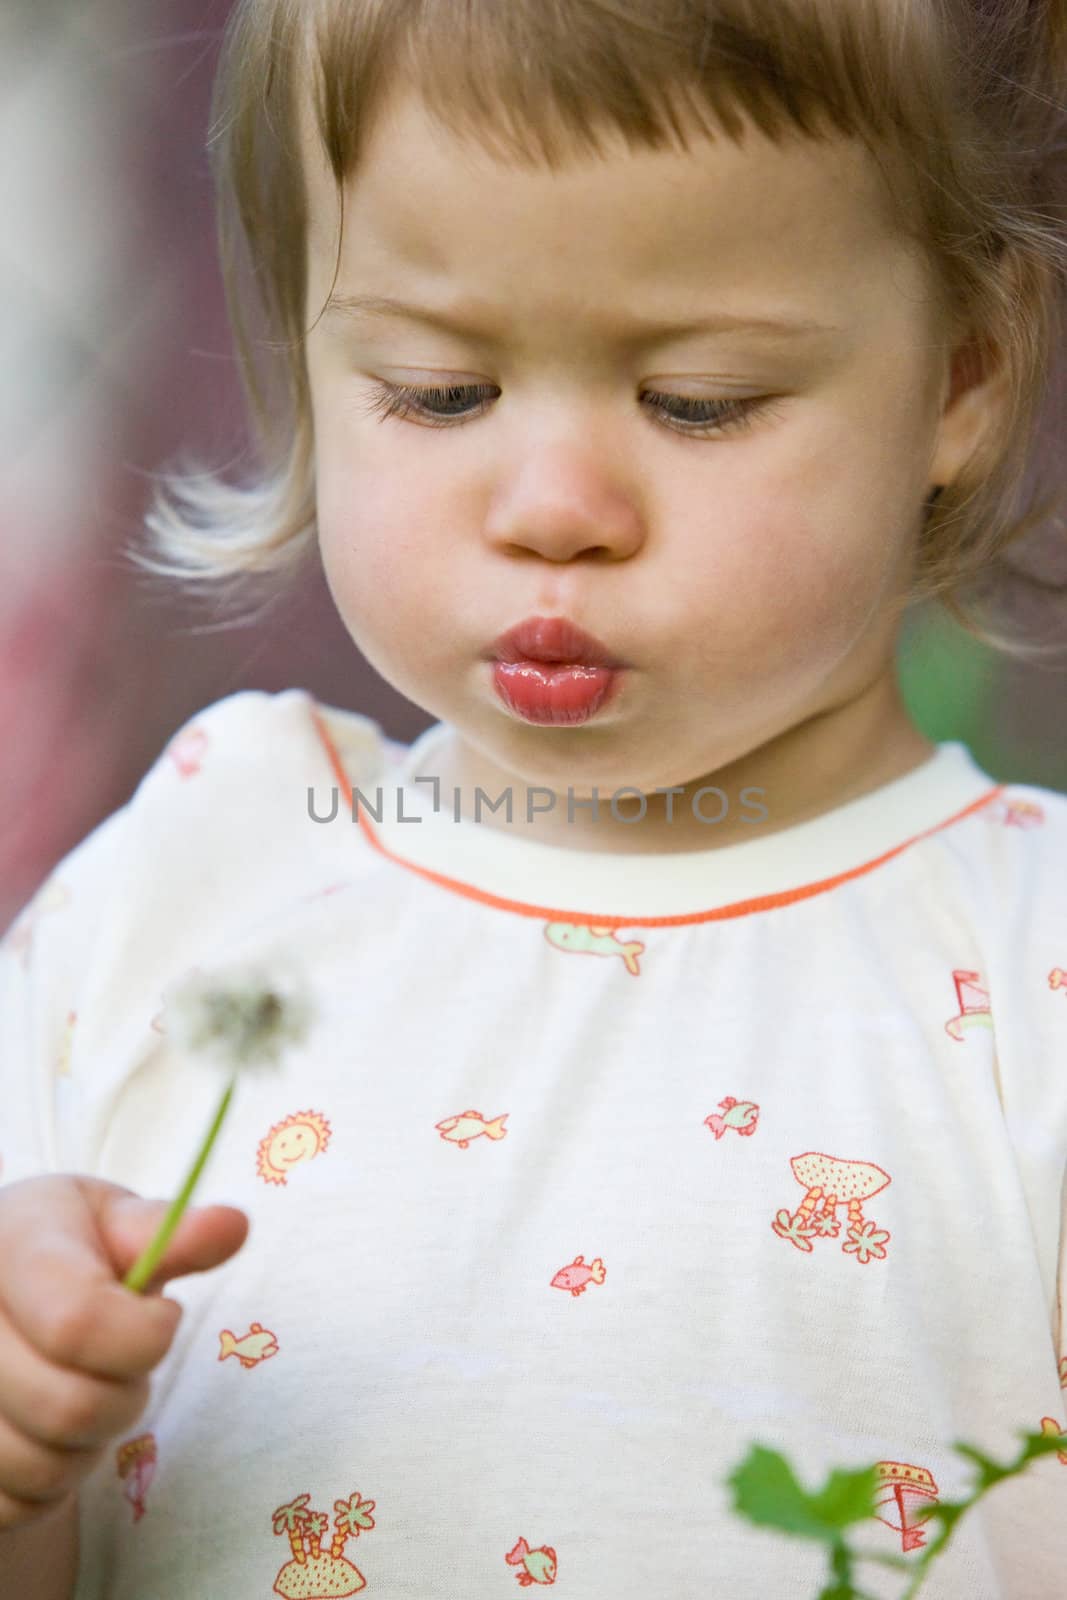 children series: little girl are blowing the dandelion